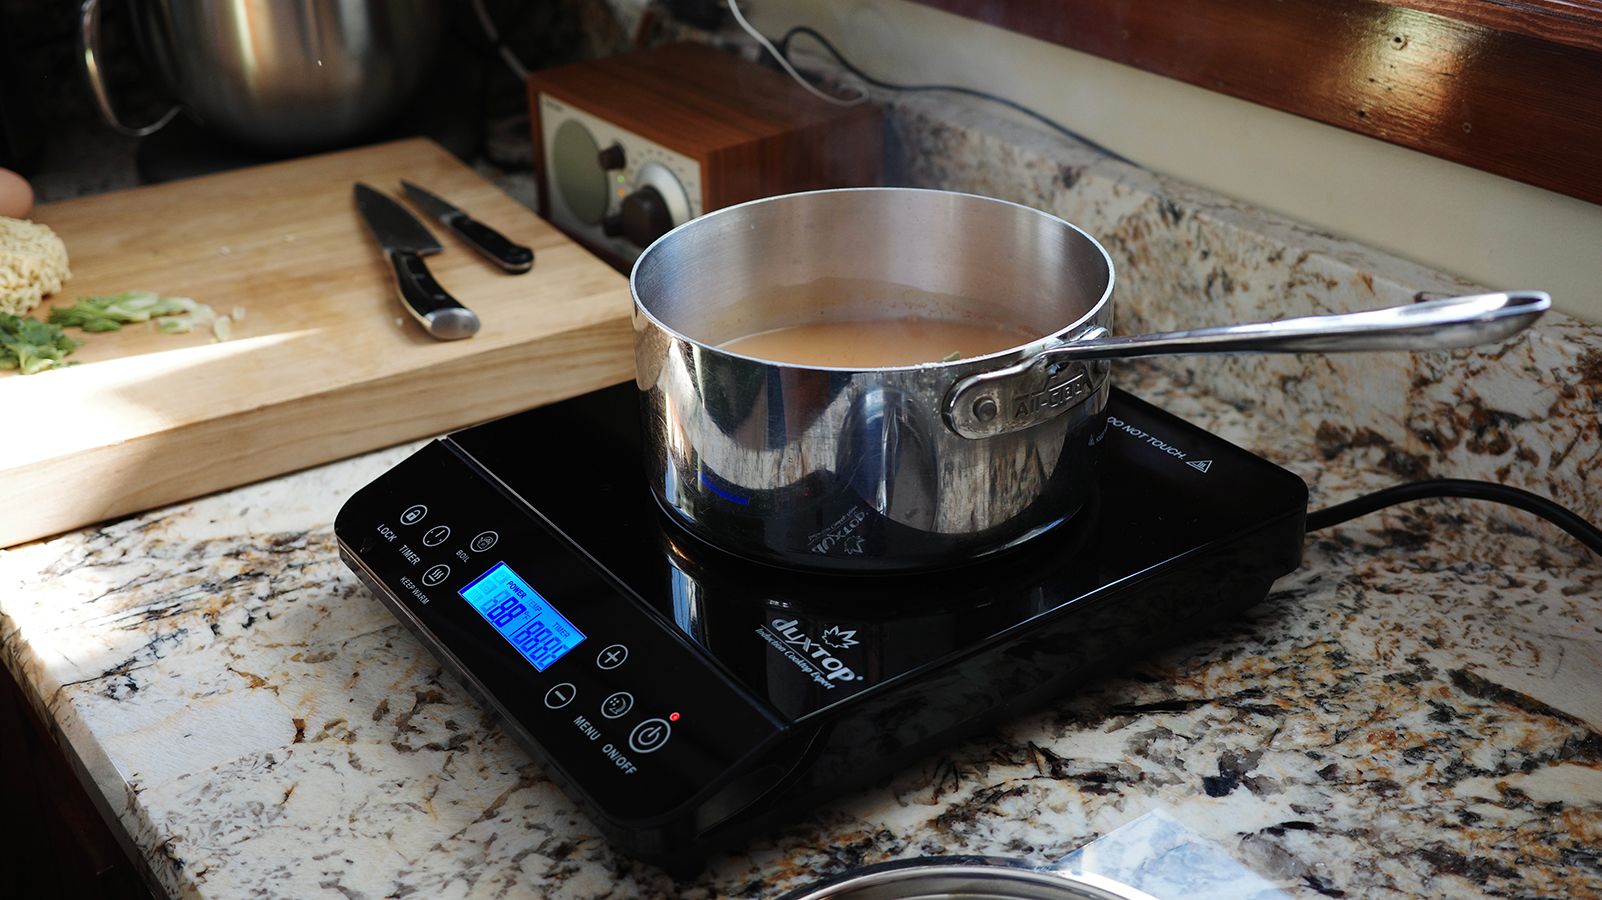 NuWave Pic Flex Precision Induction Cooktop with 9 Fry Pan